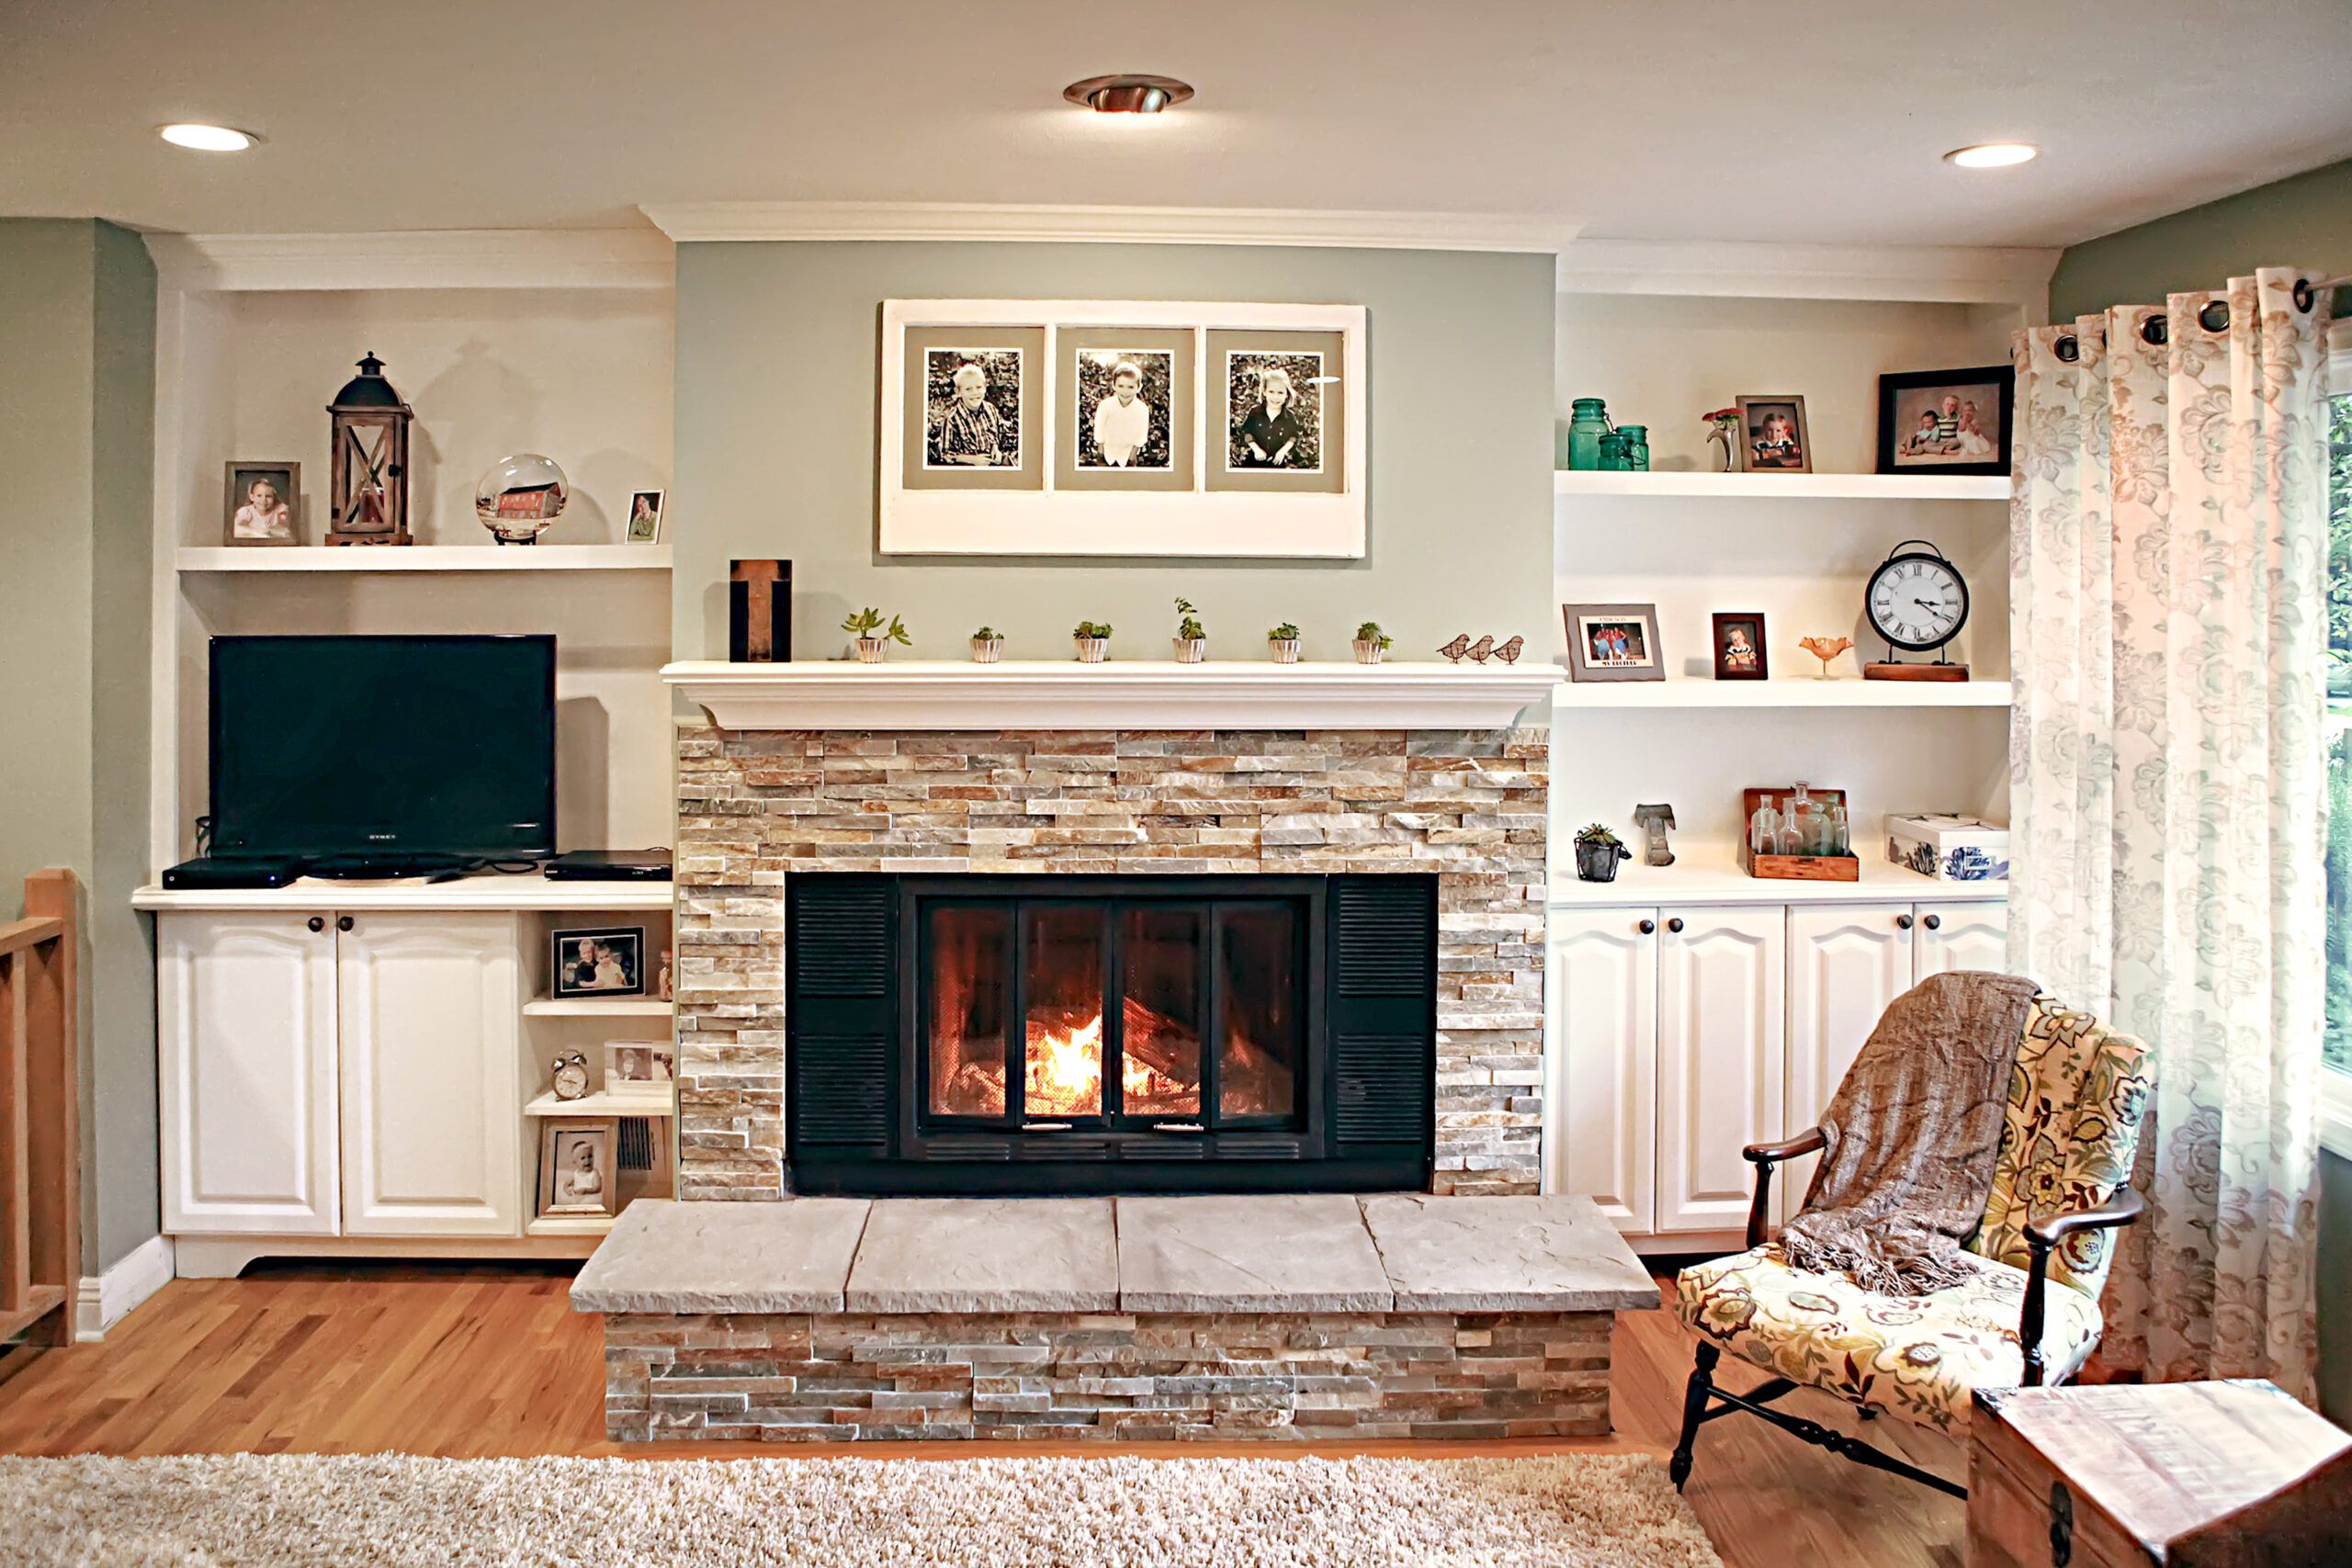 a cheery fireplace for $795 - this old house